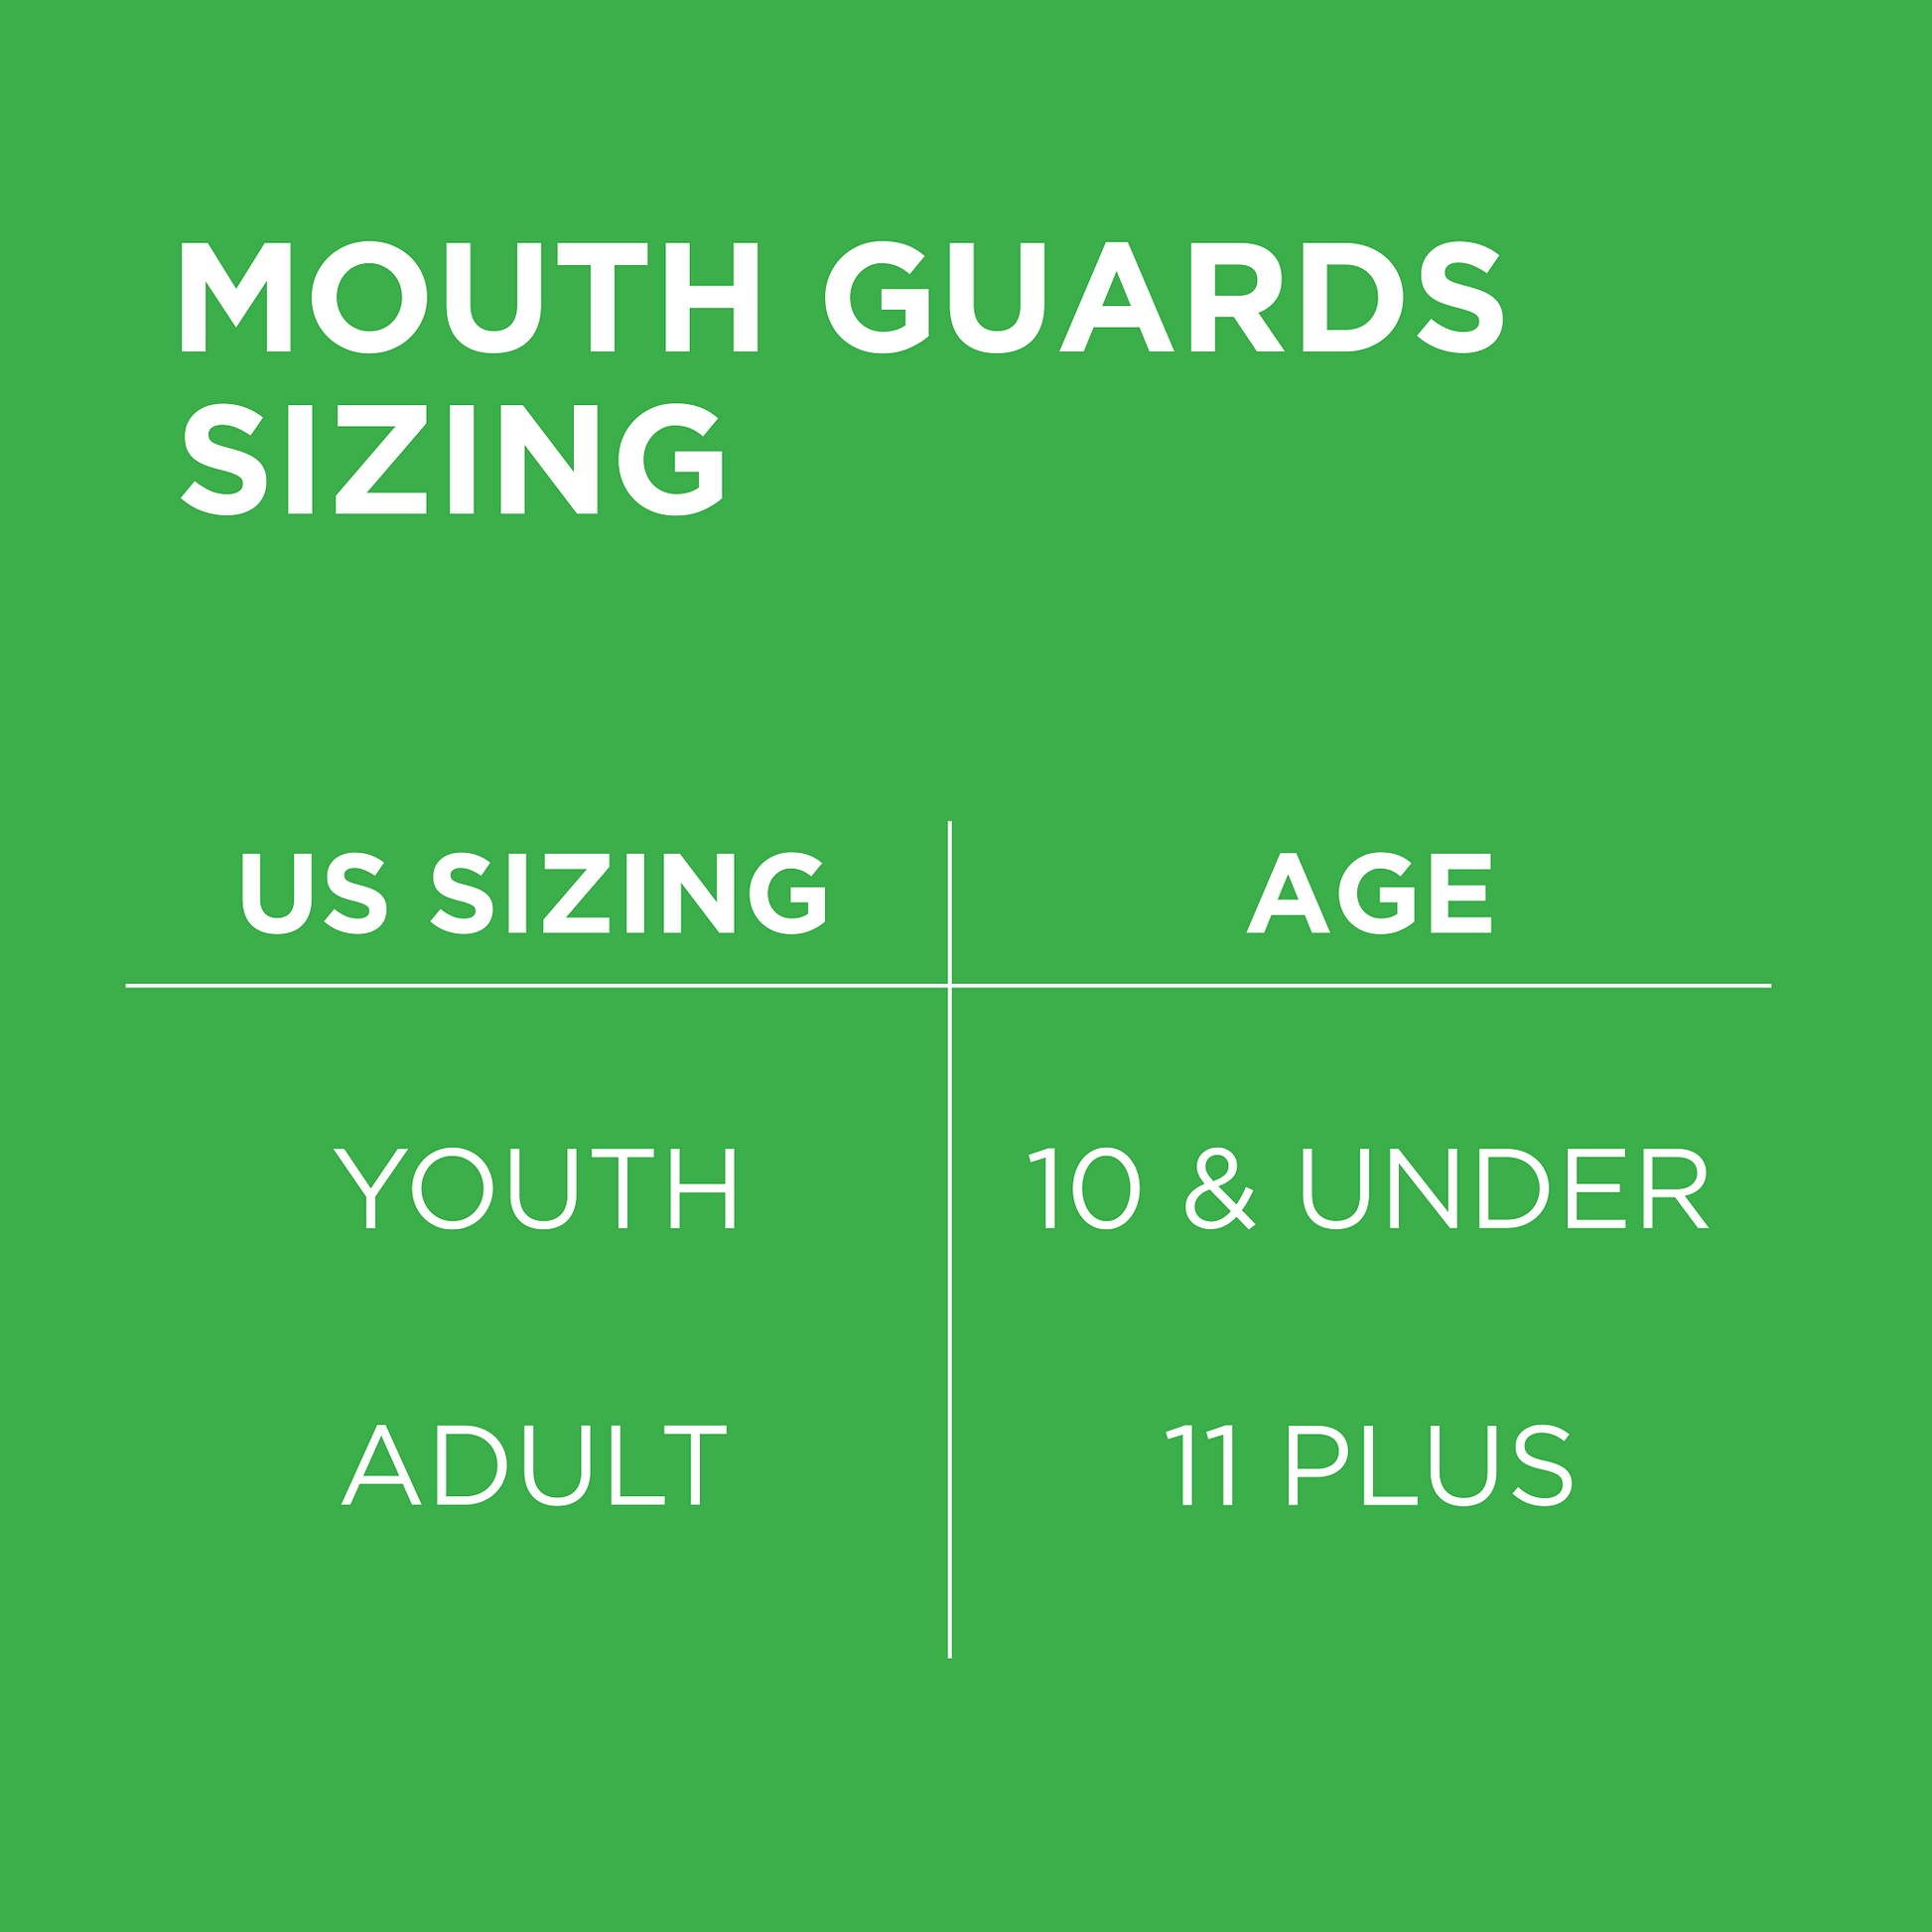 Mouth guards sizing. US sizing youth for age 10 & under. US sizing adult for age 11 and older.  